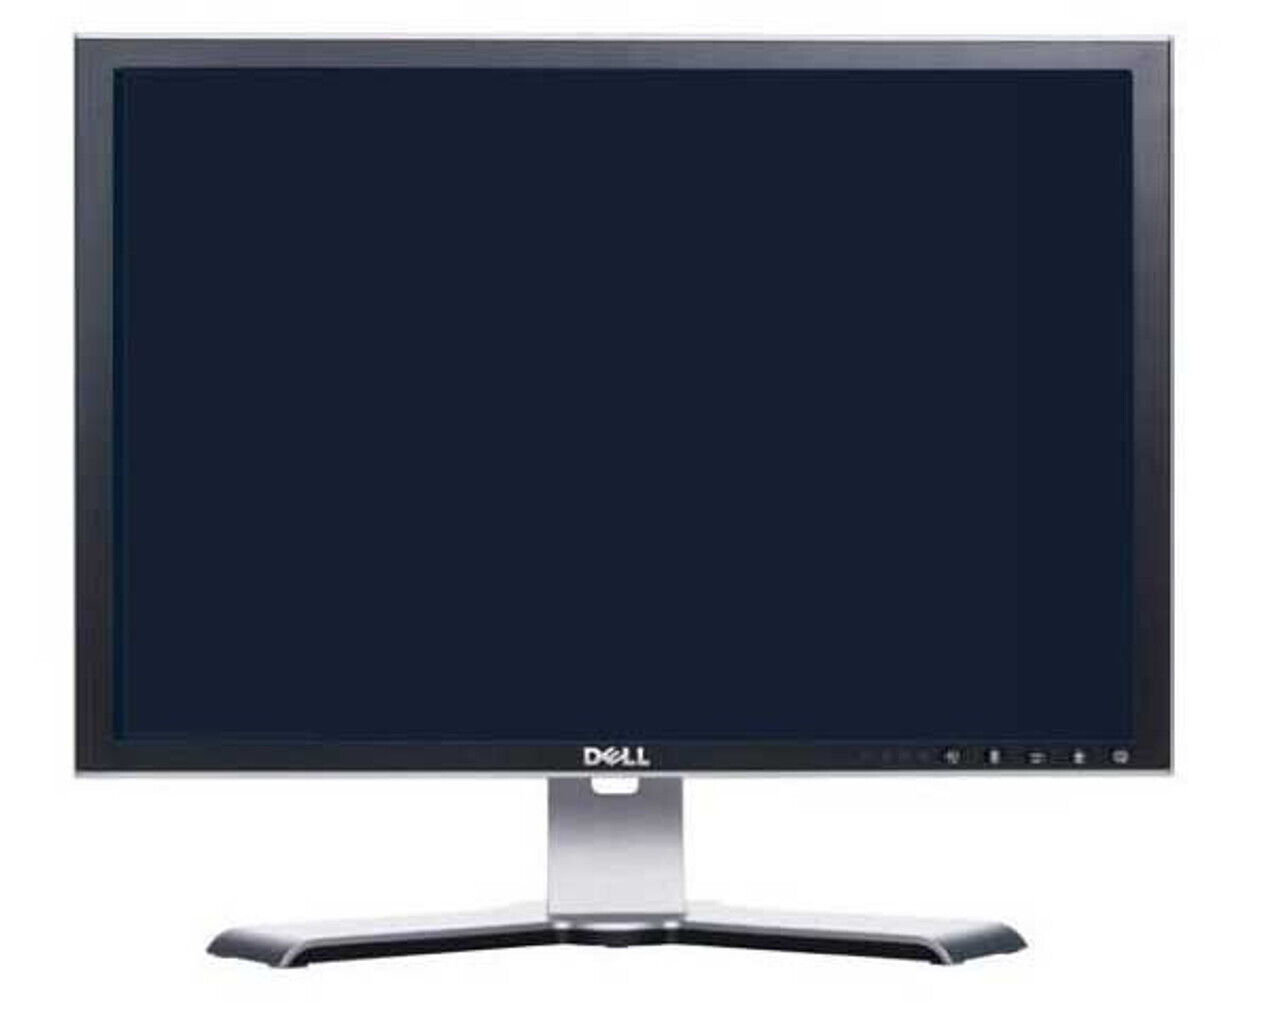 Dell Ultrasharp Flat Panel 24 Inch LCD Computer Monitor Adjustable Height Stand